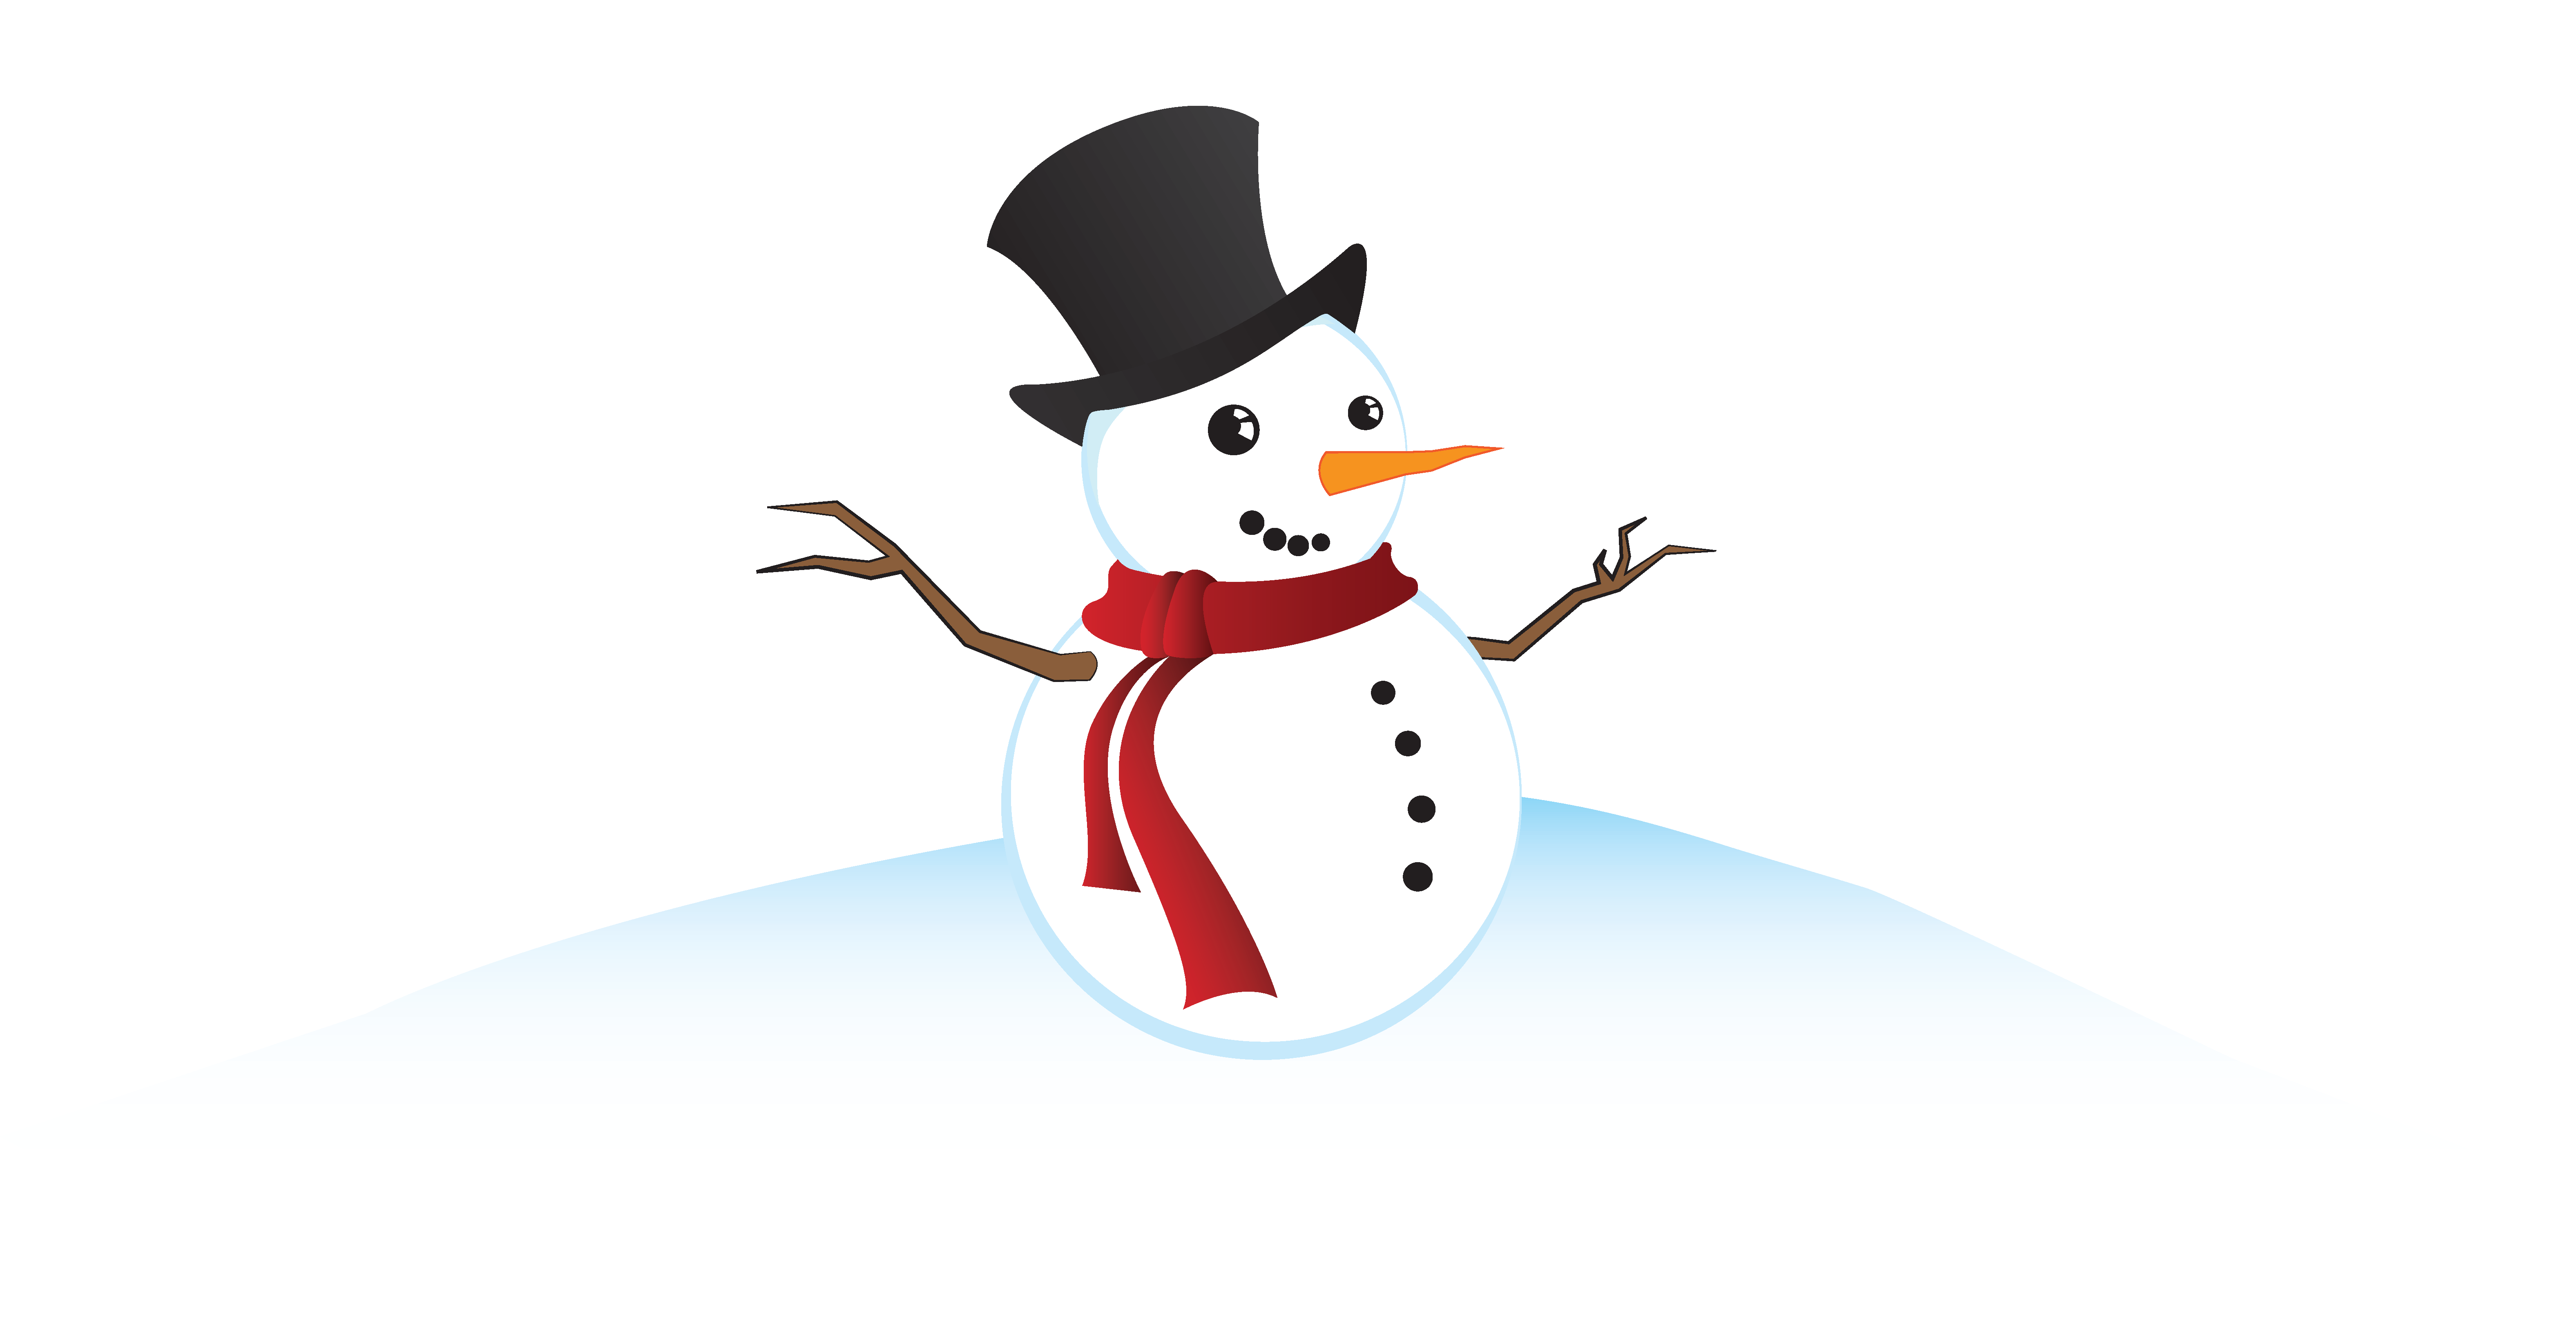 The great snowman building. Evaporation clipart everyday life